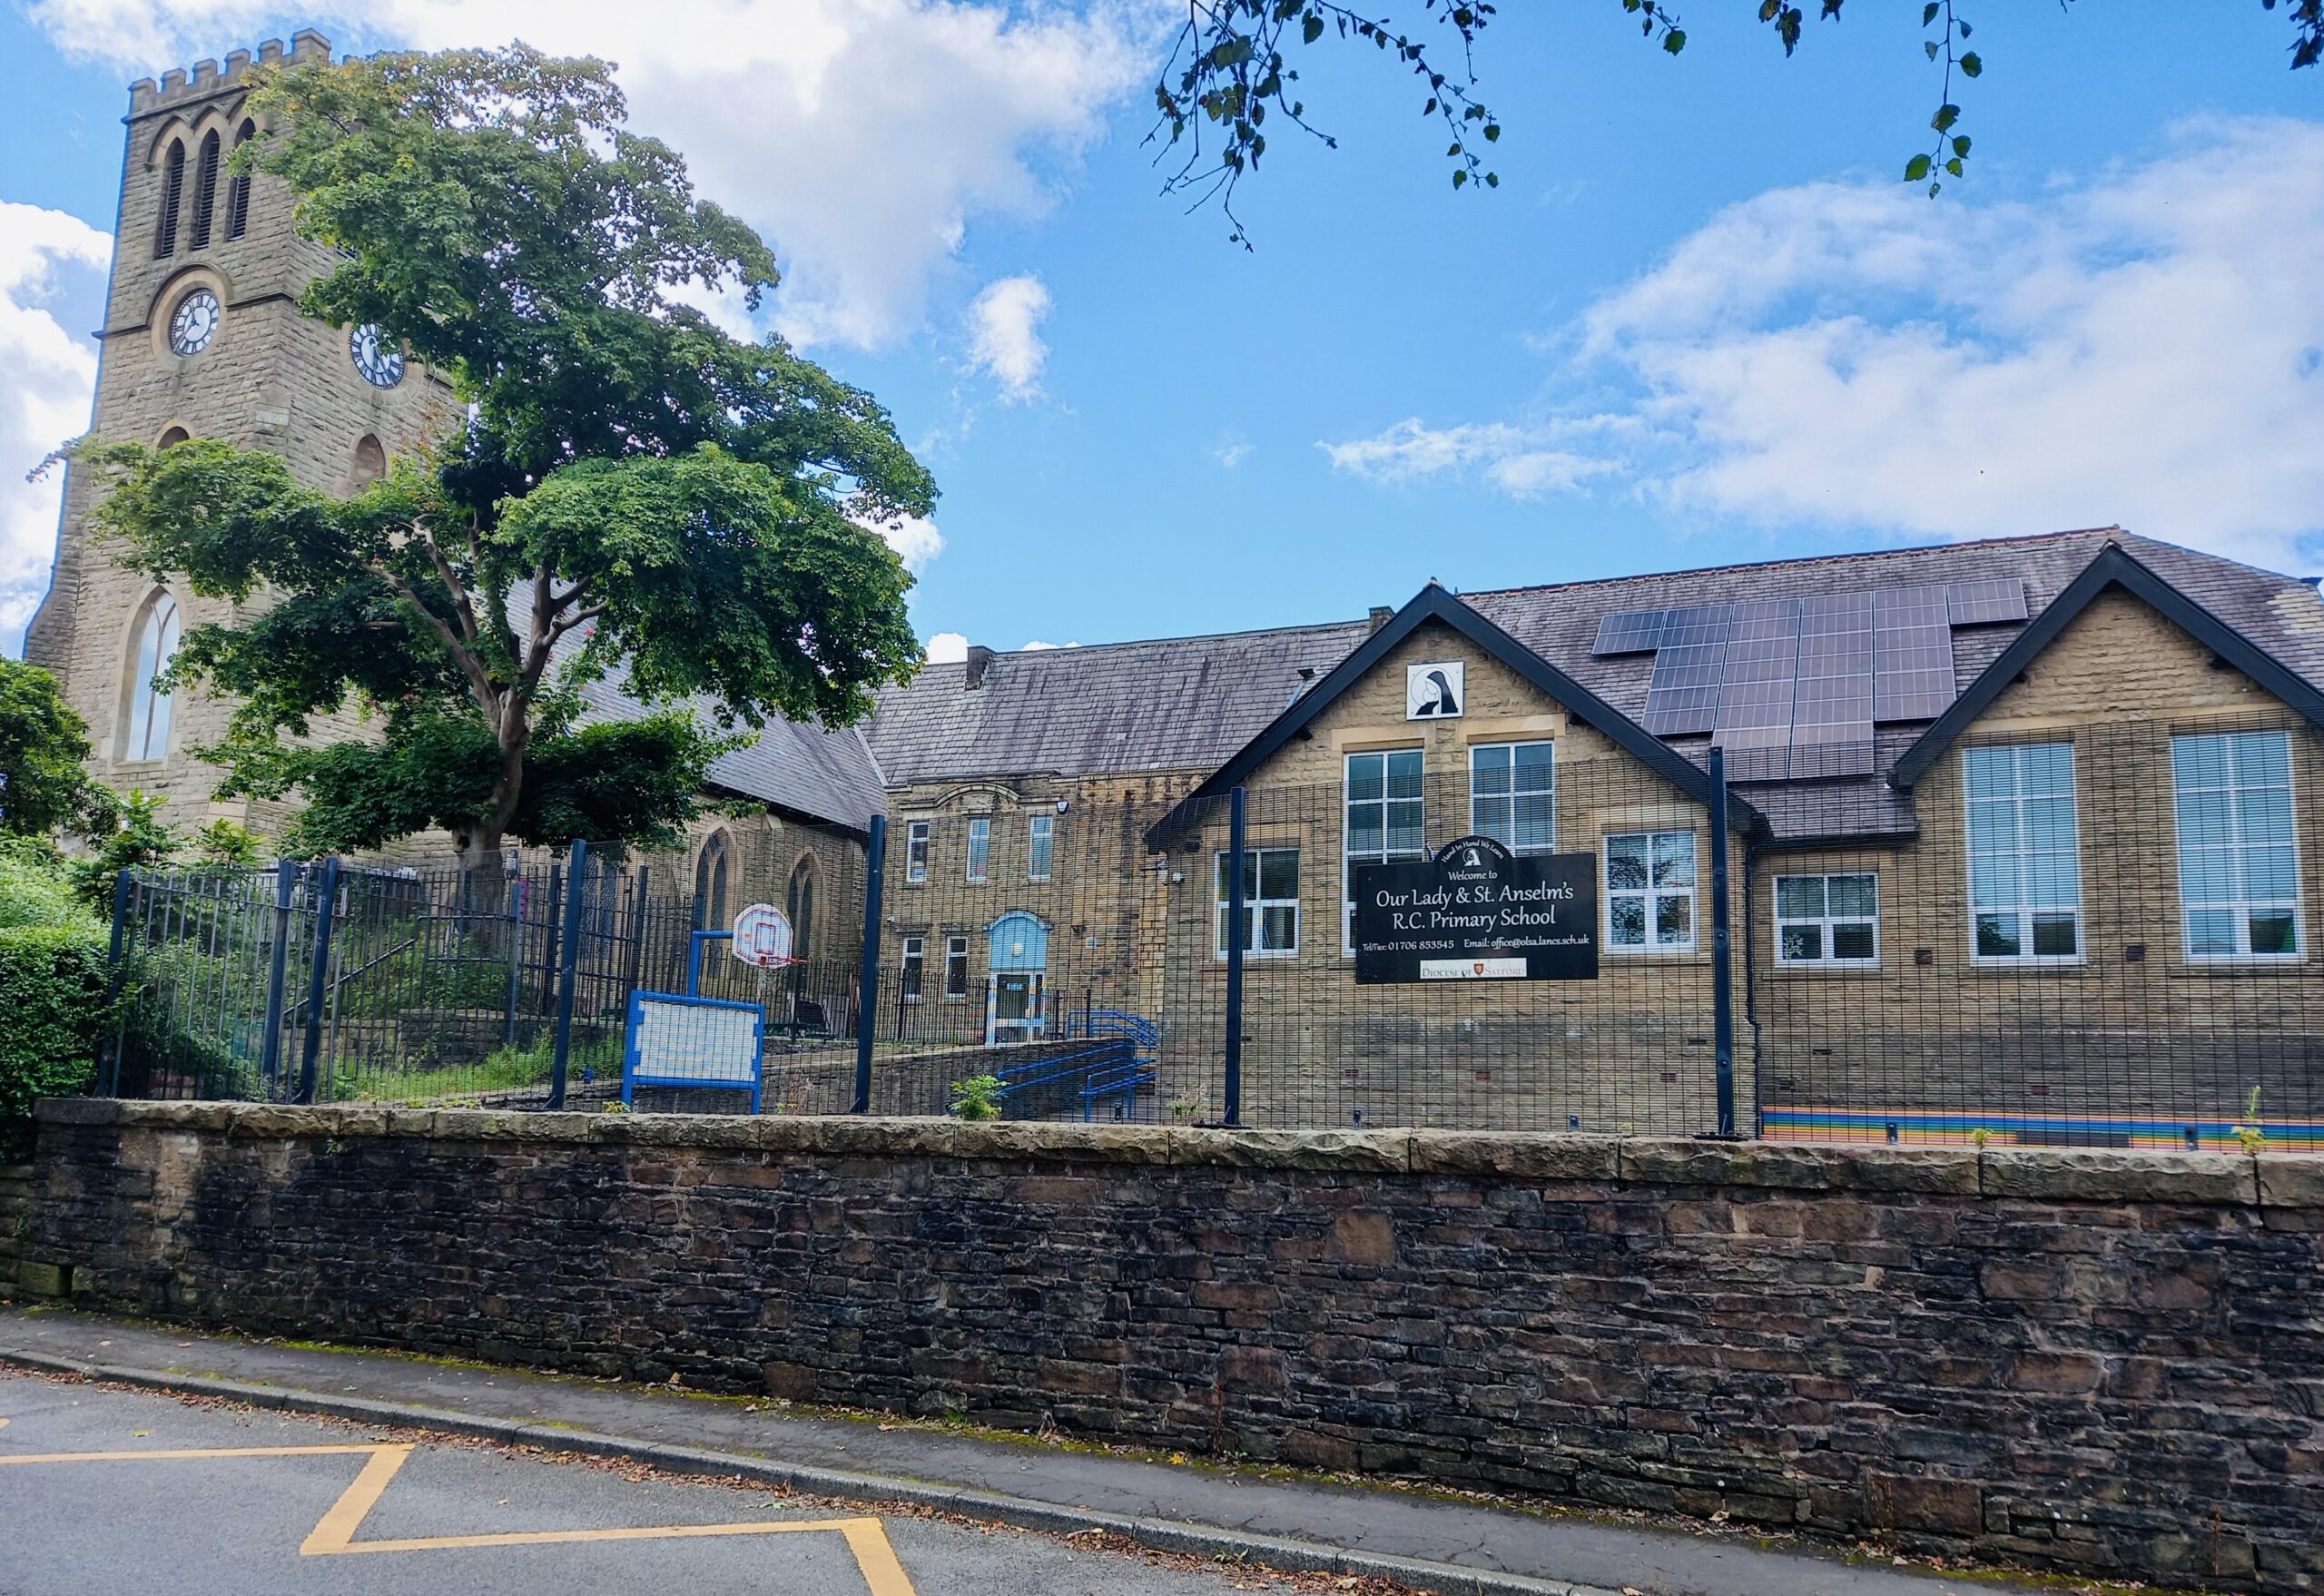 Our Lady & St Anselm’s RC Primary School (Whitworth)